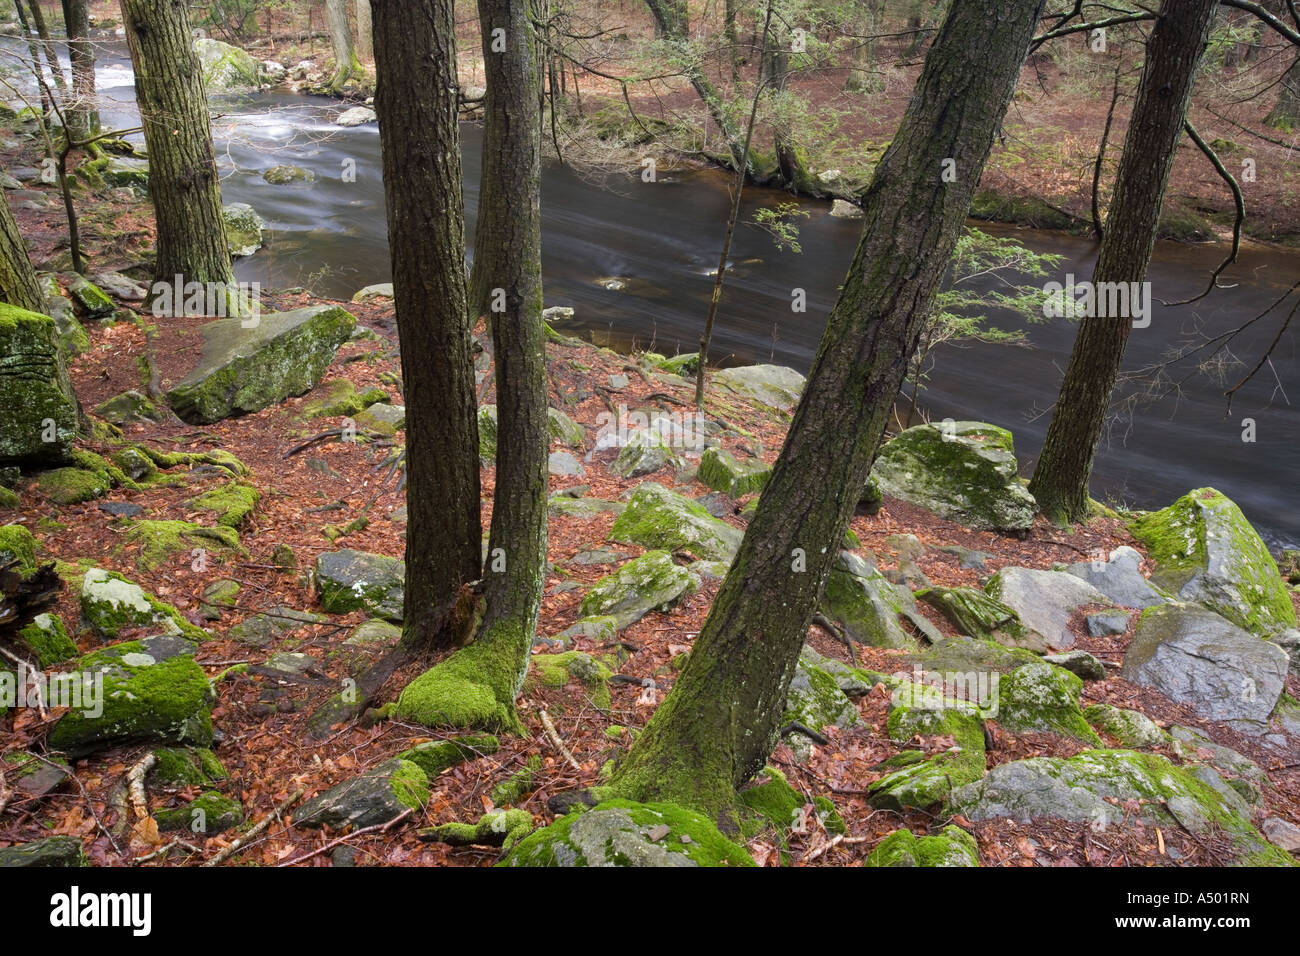 A forest of Eastern Hemlock trees on the banks of the Eight Mile River in Devil s Hopyard State Park in East Haddam Connecticut Stock Photo